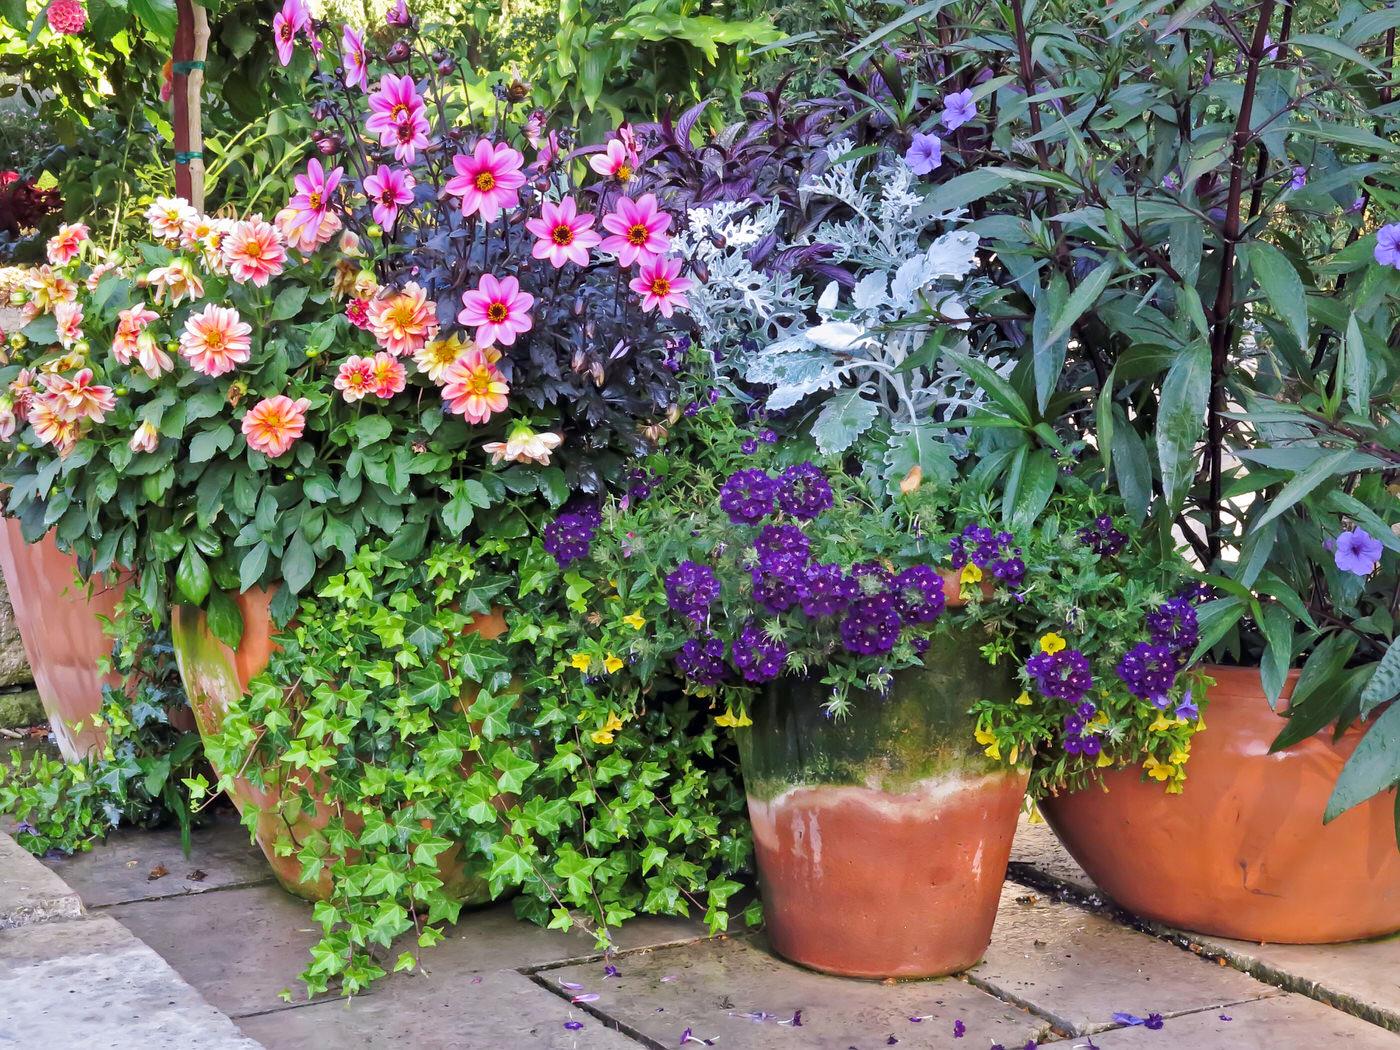 Baskets and Containers